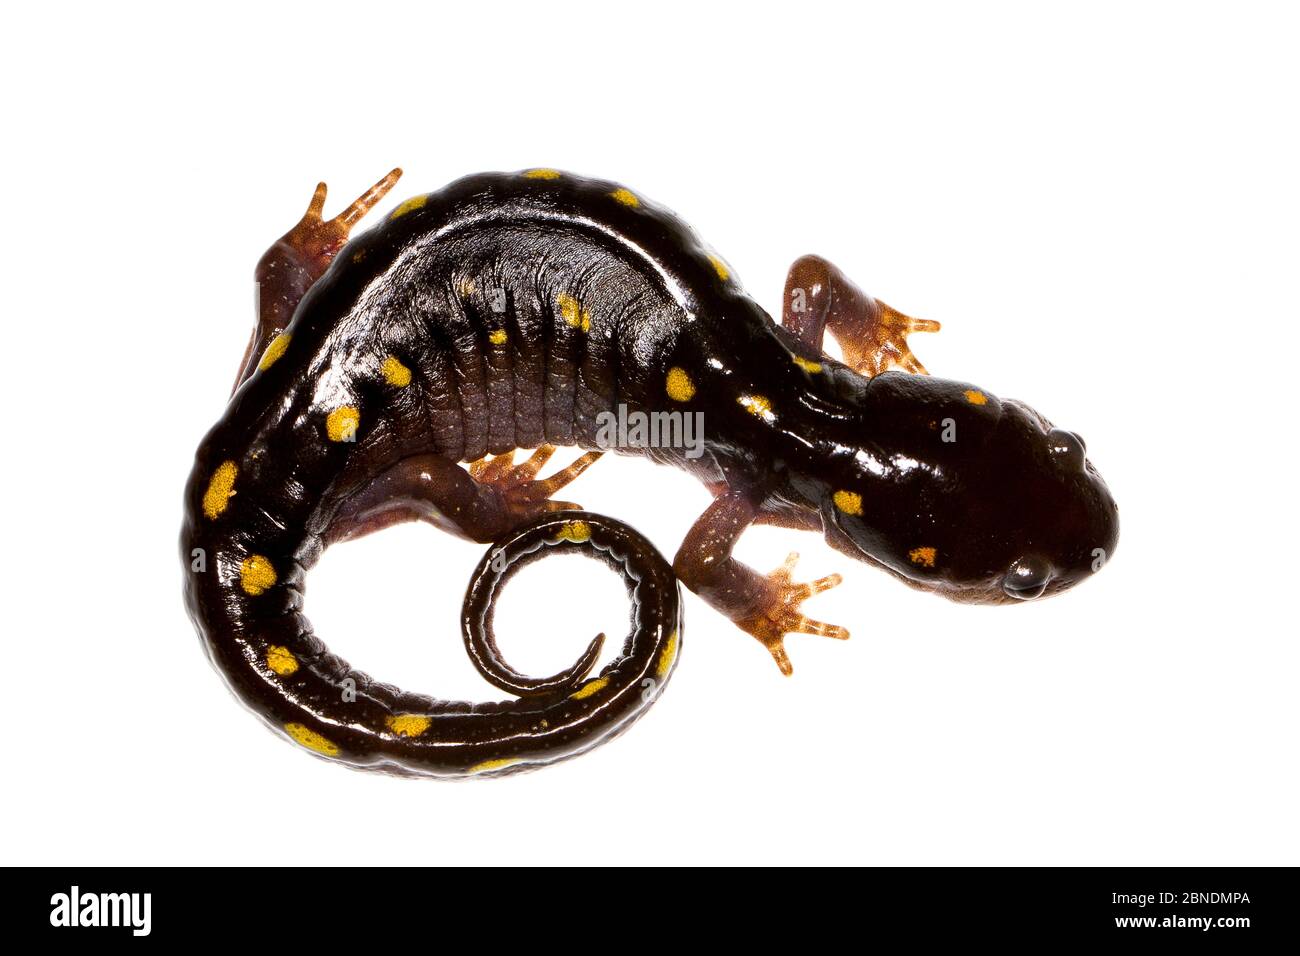 Spotted salamander (Ambystoma maculatum) Oxford, Mississippi, USA, March. Meetyourneighbours.net project Stock Photo